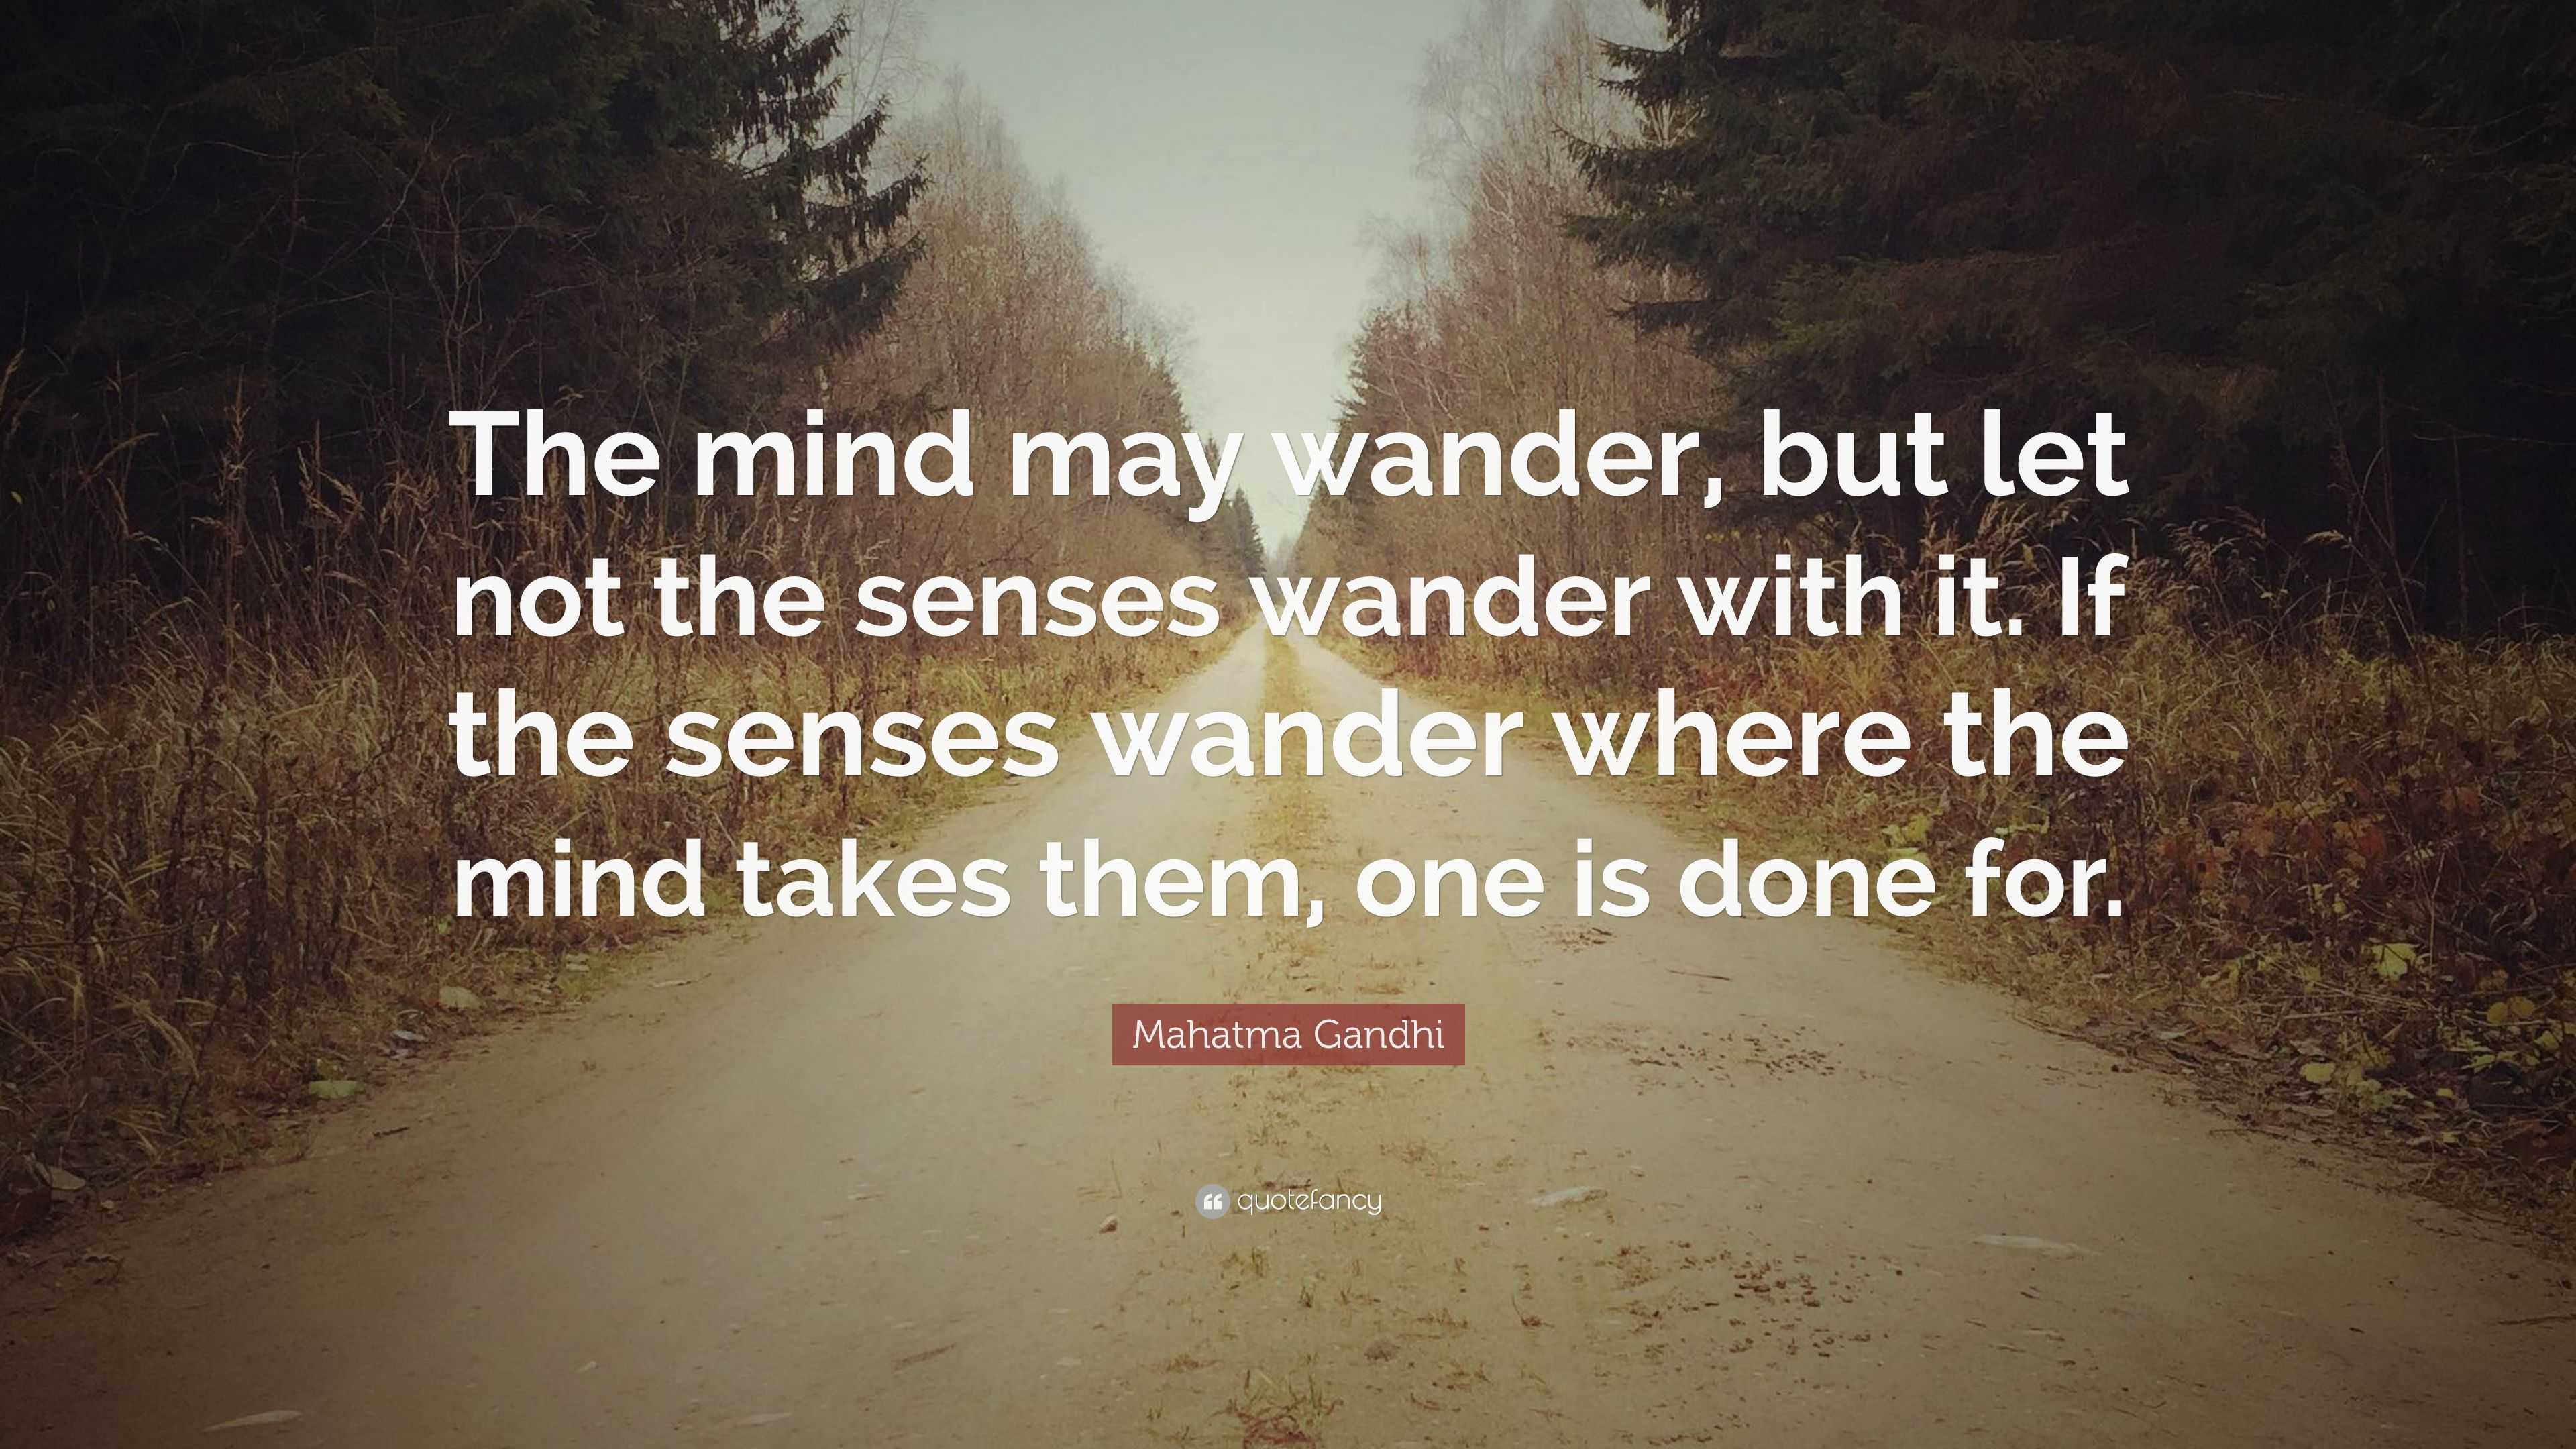 wandering mind phrases